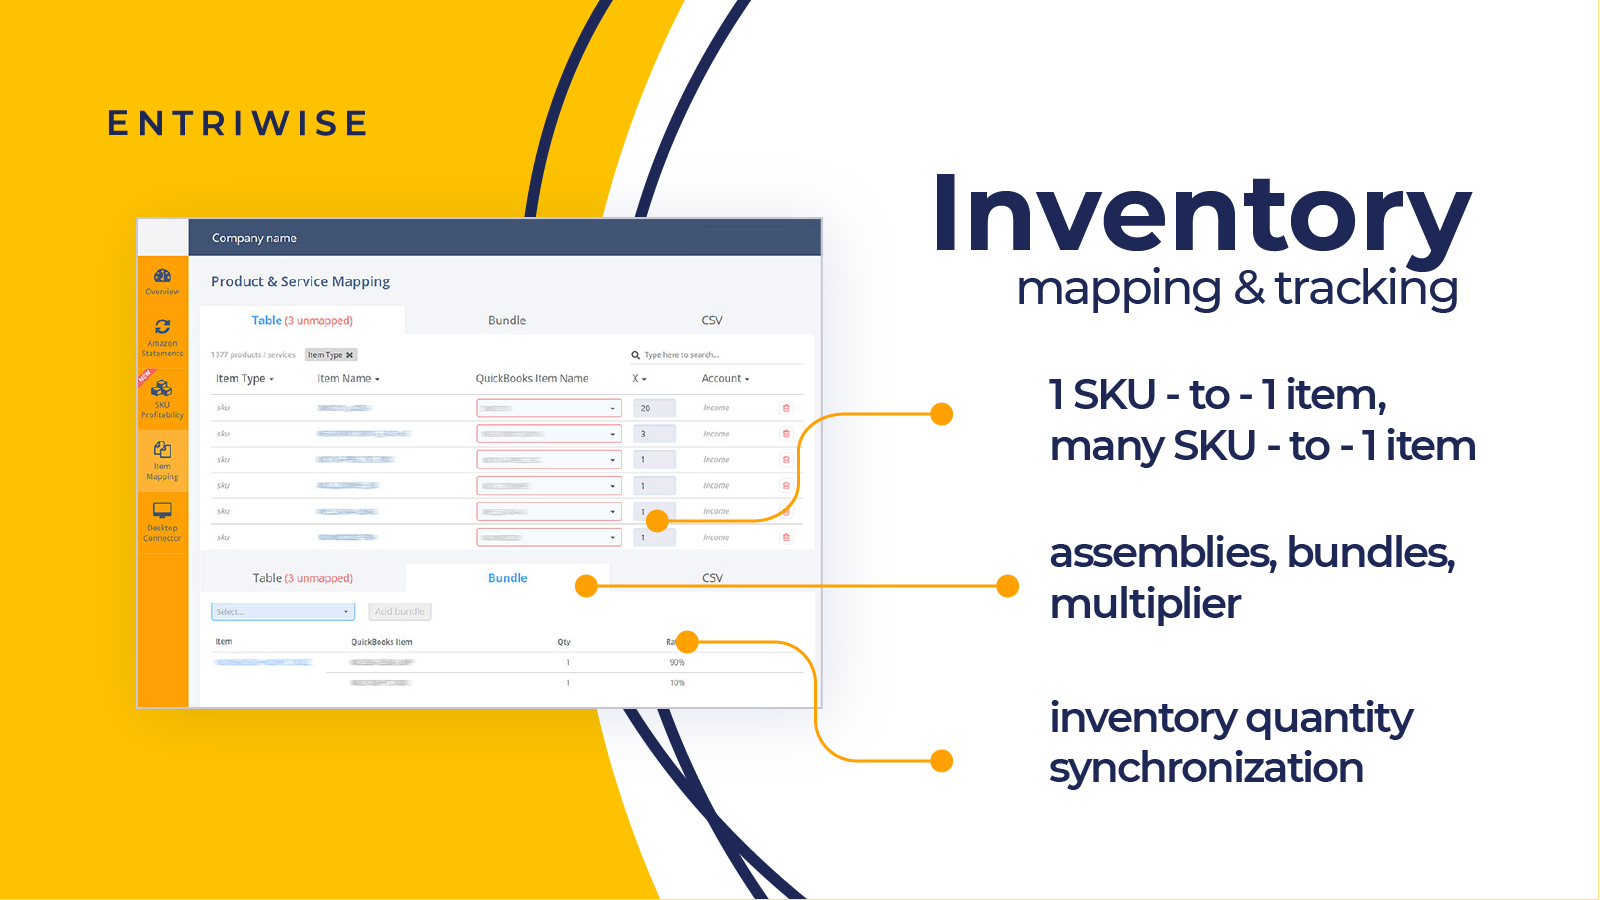 Map inventory and sync quantity